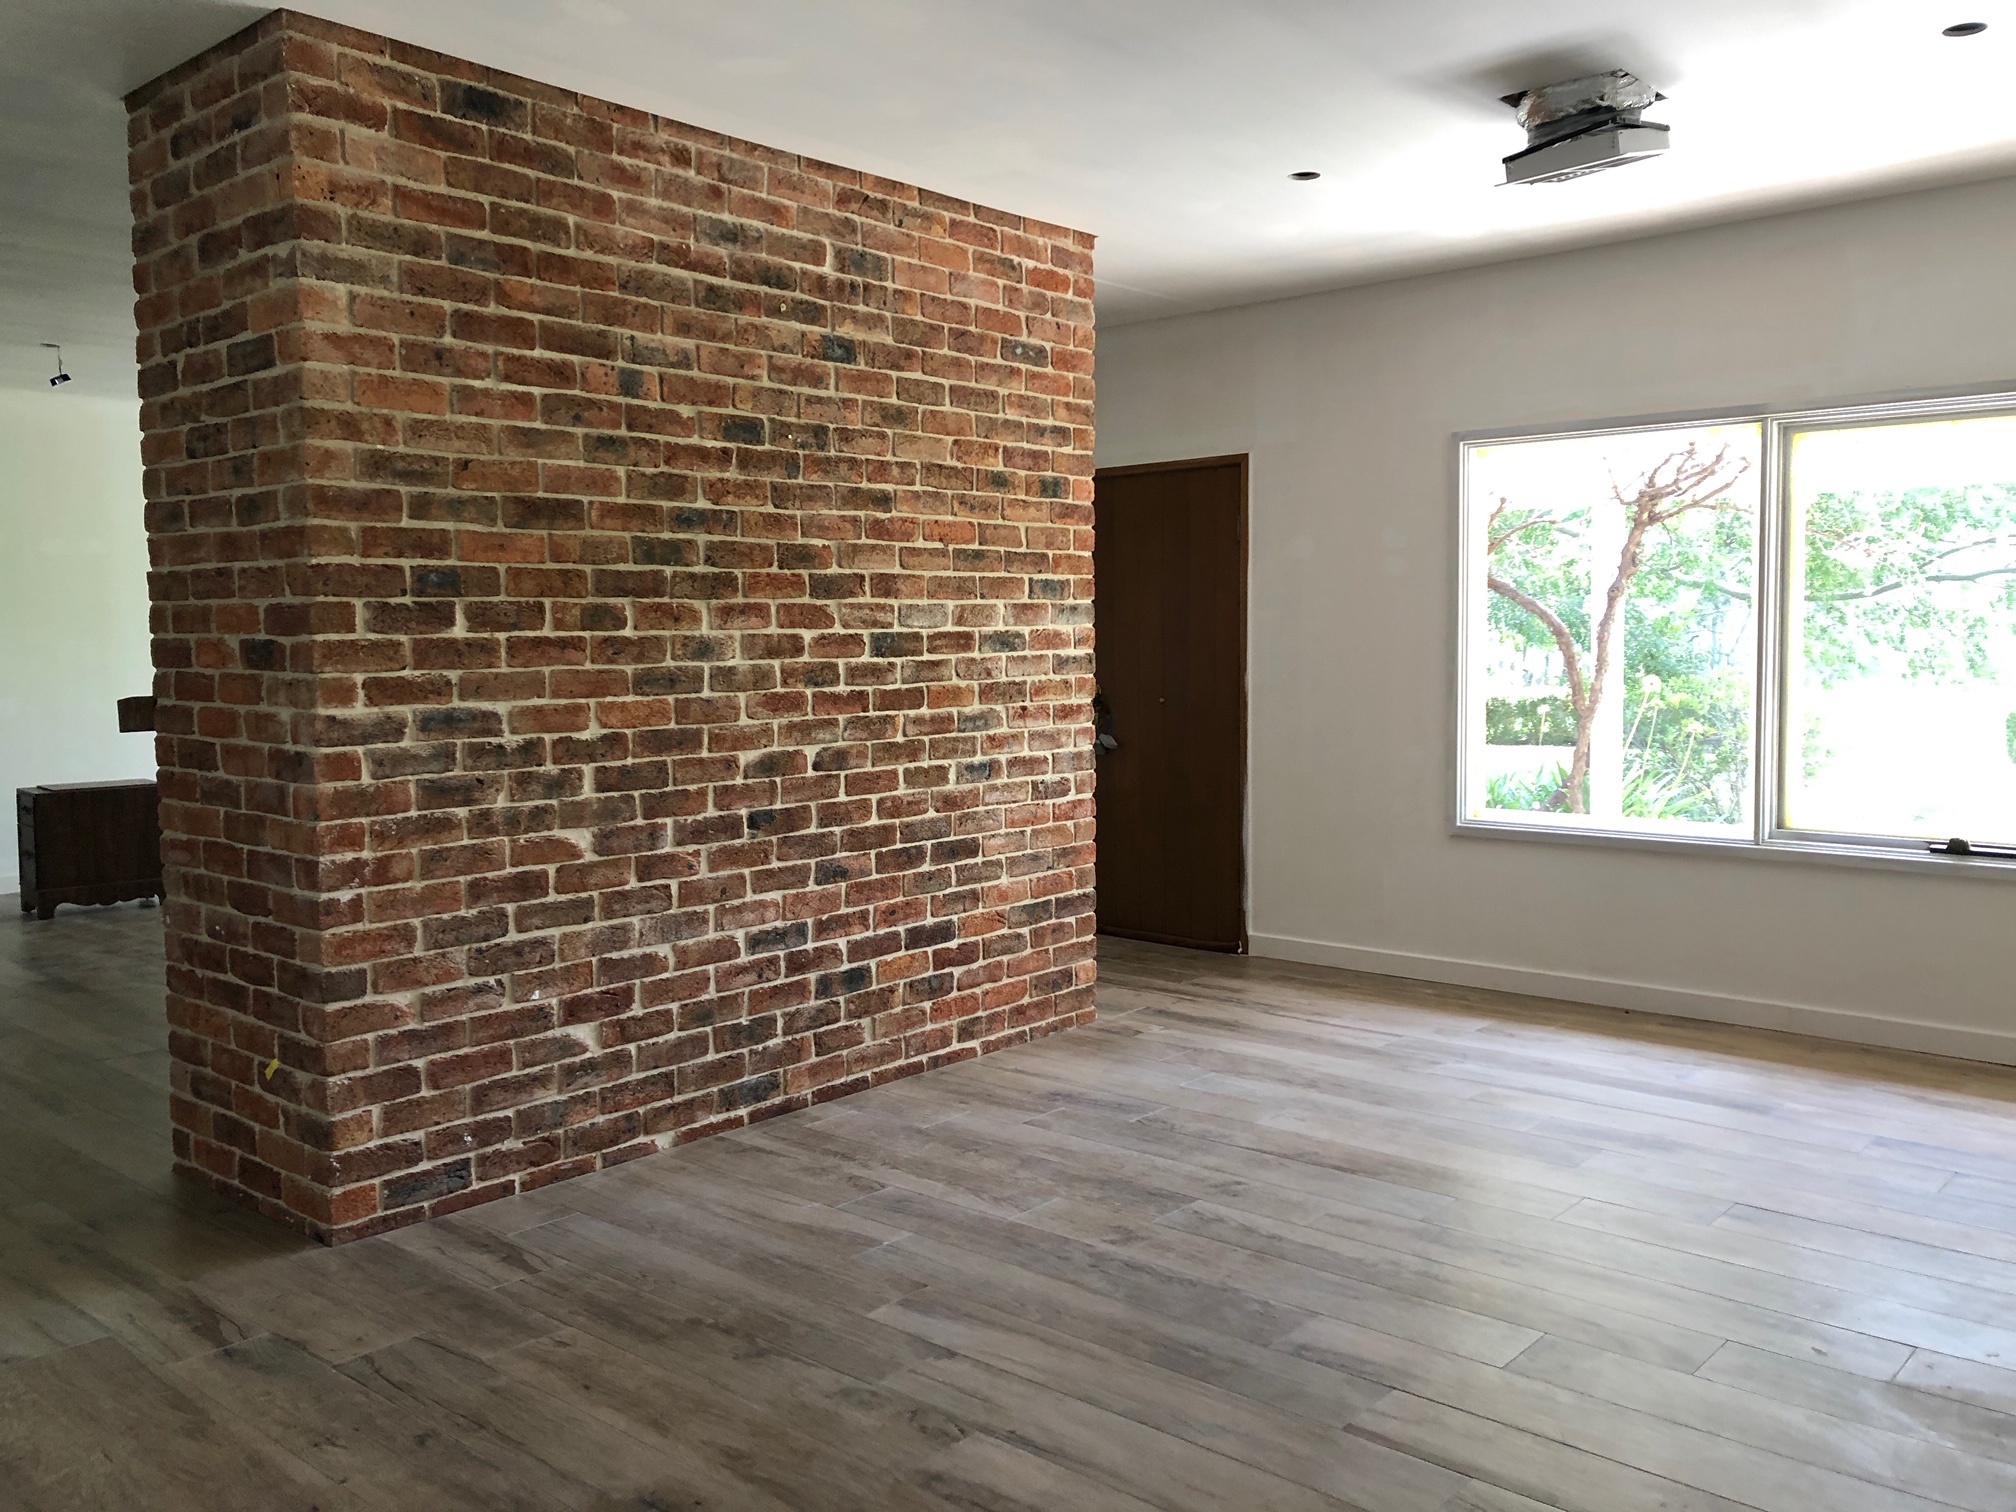 Hunter Plank undertile natural wooden floor heating with large brick fireplace